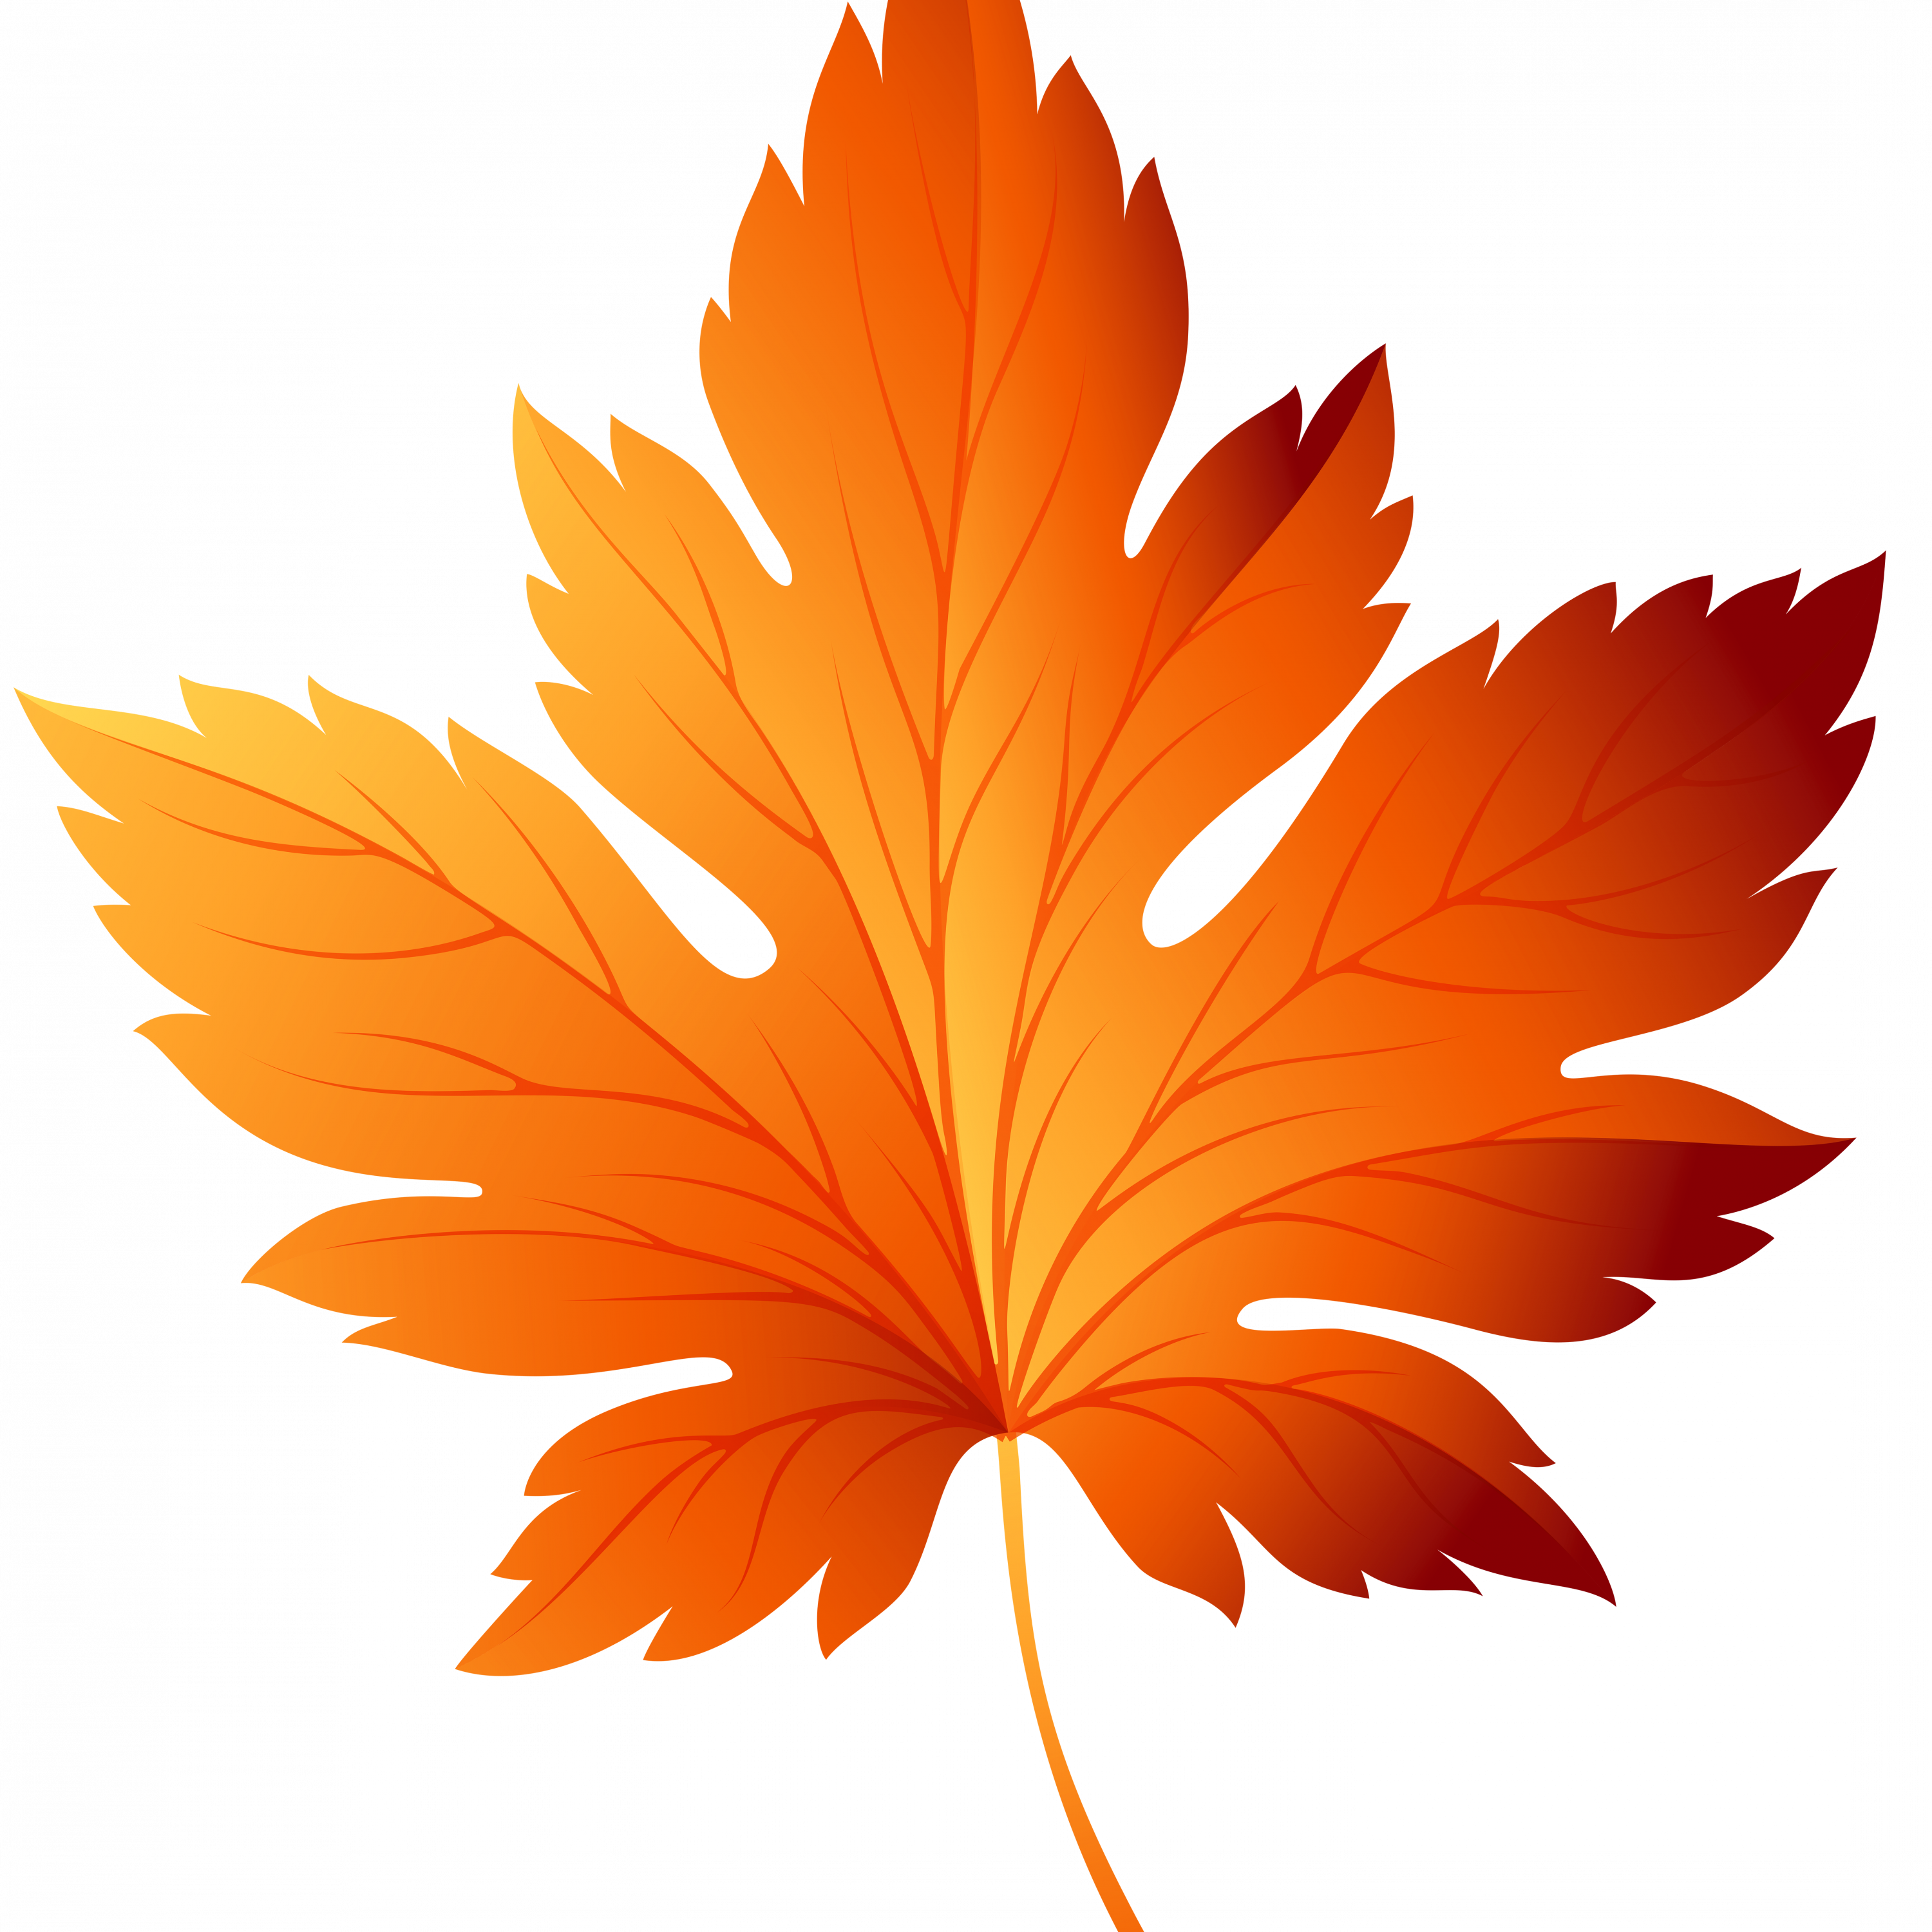 Fall Leaves Background Clipart - Fall Leaf Clip Art (3000x3000)